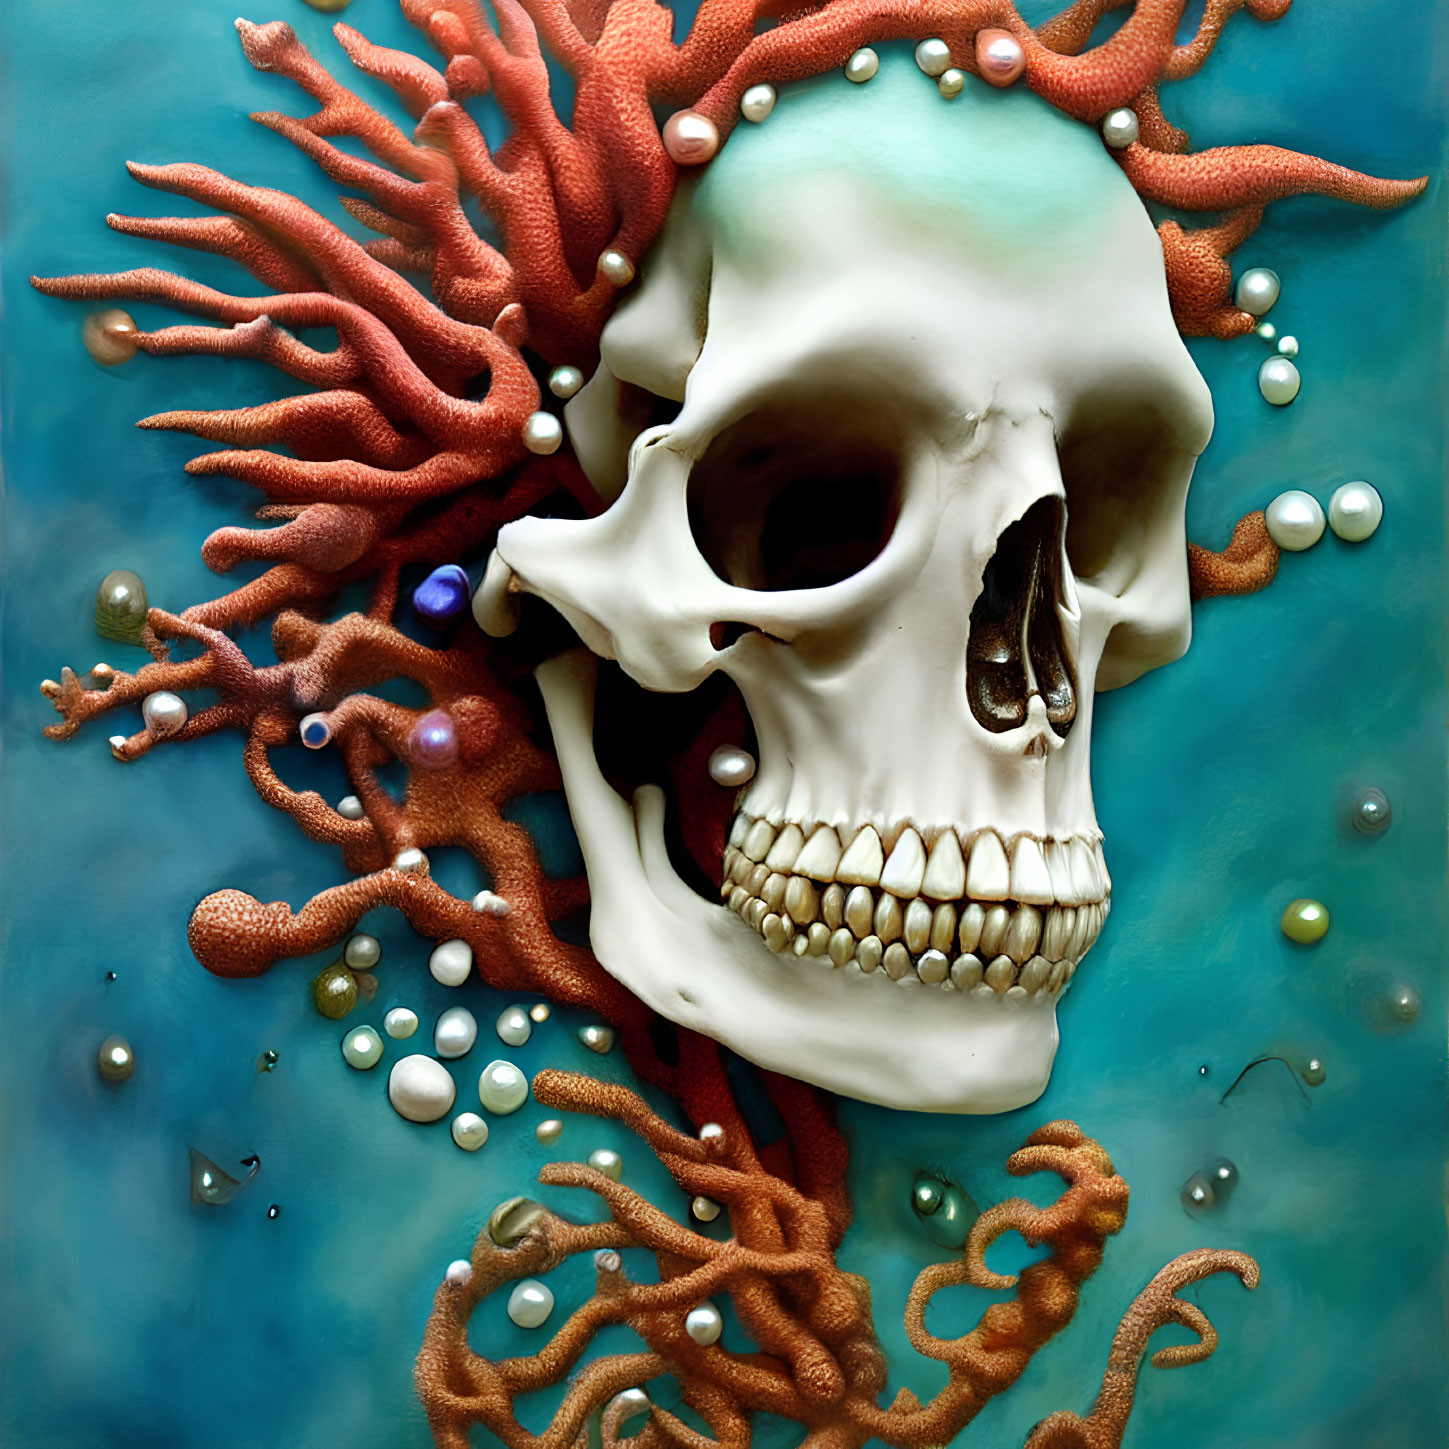 Human skull partially enveloped by red coral on turquoise background with pearls and bubbles